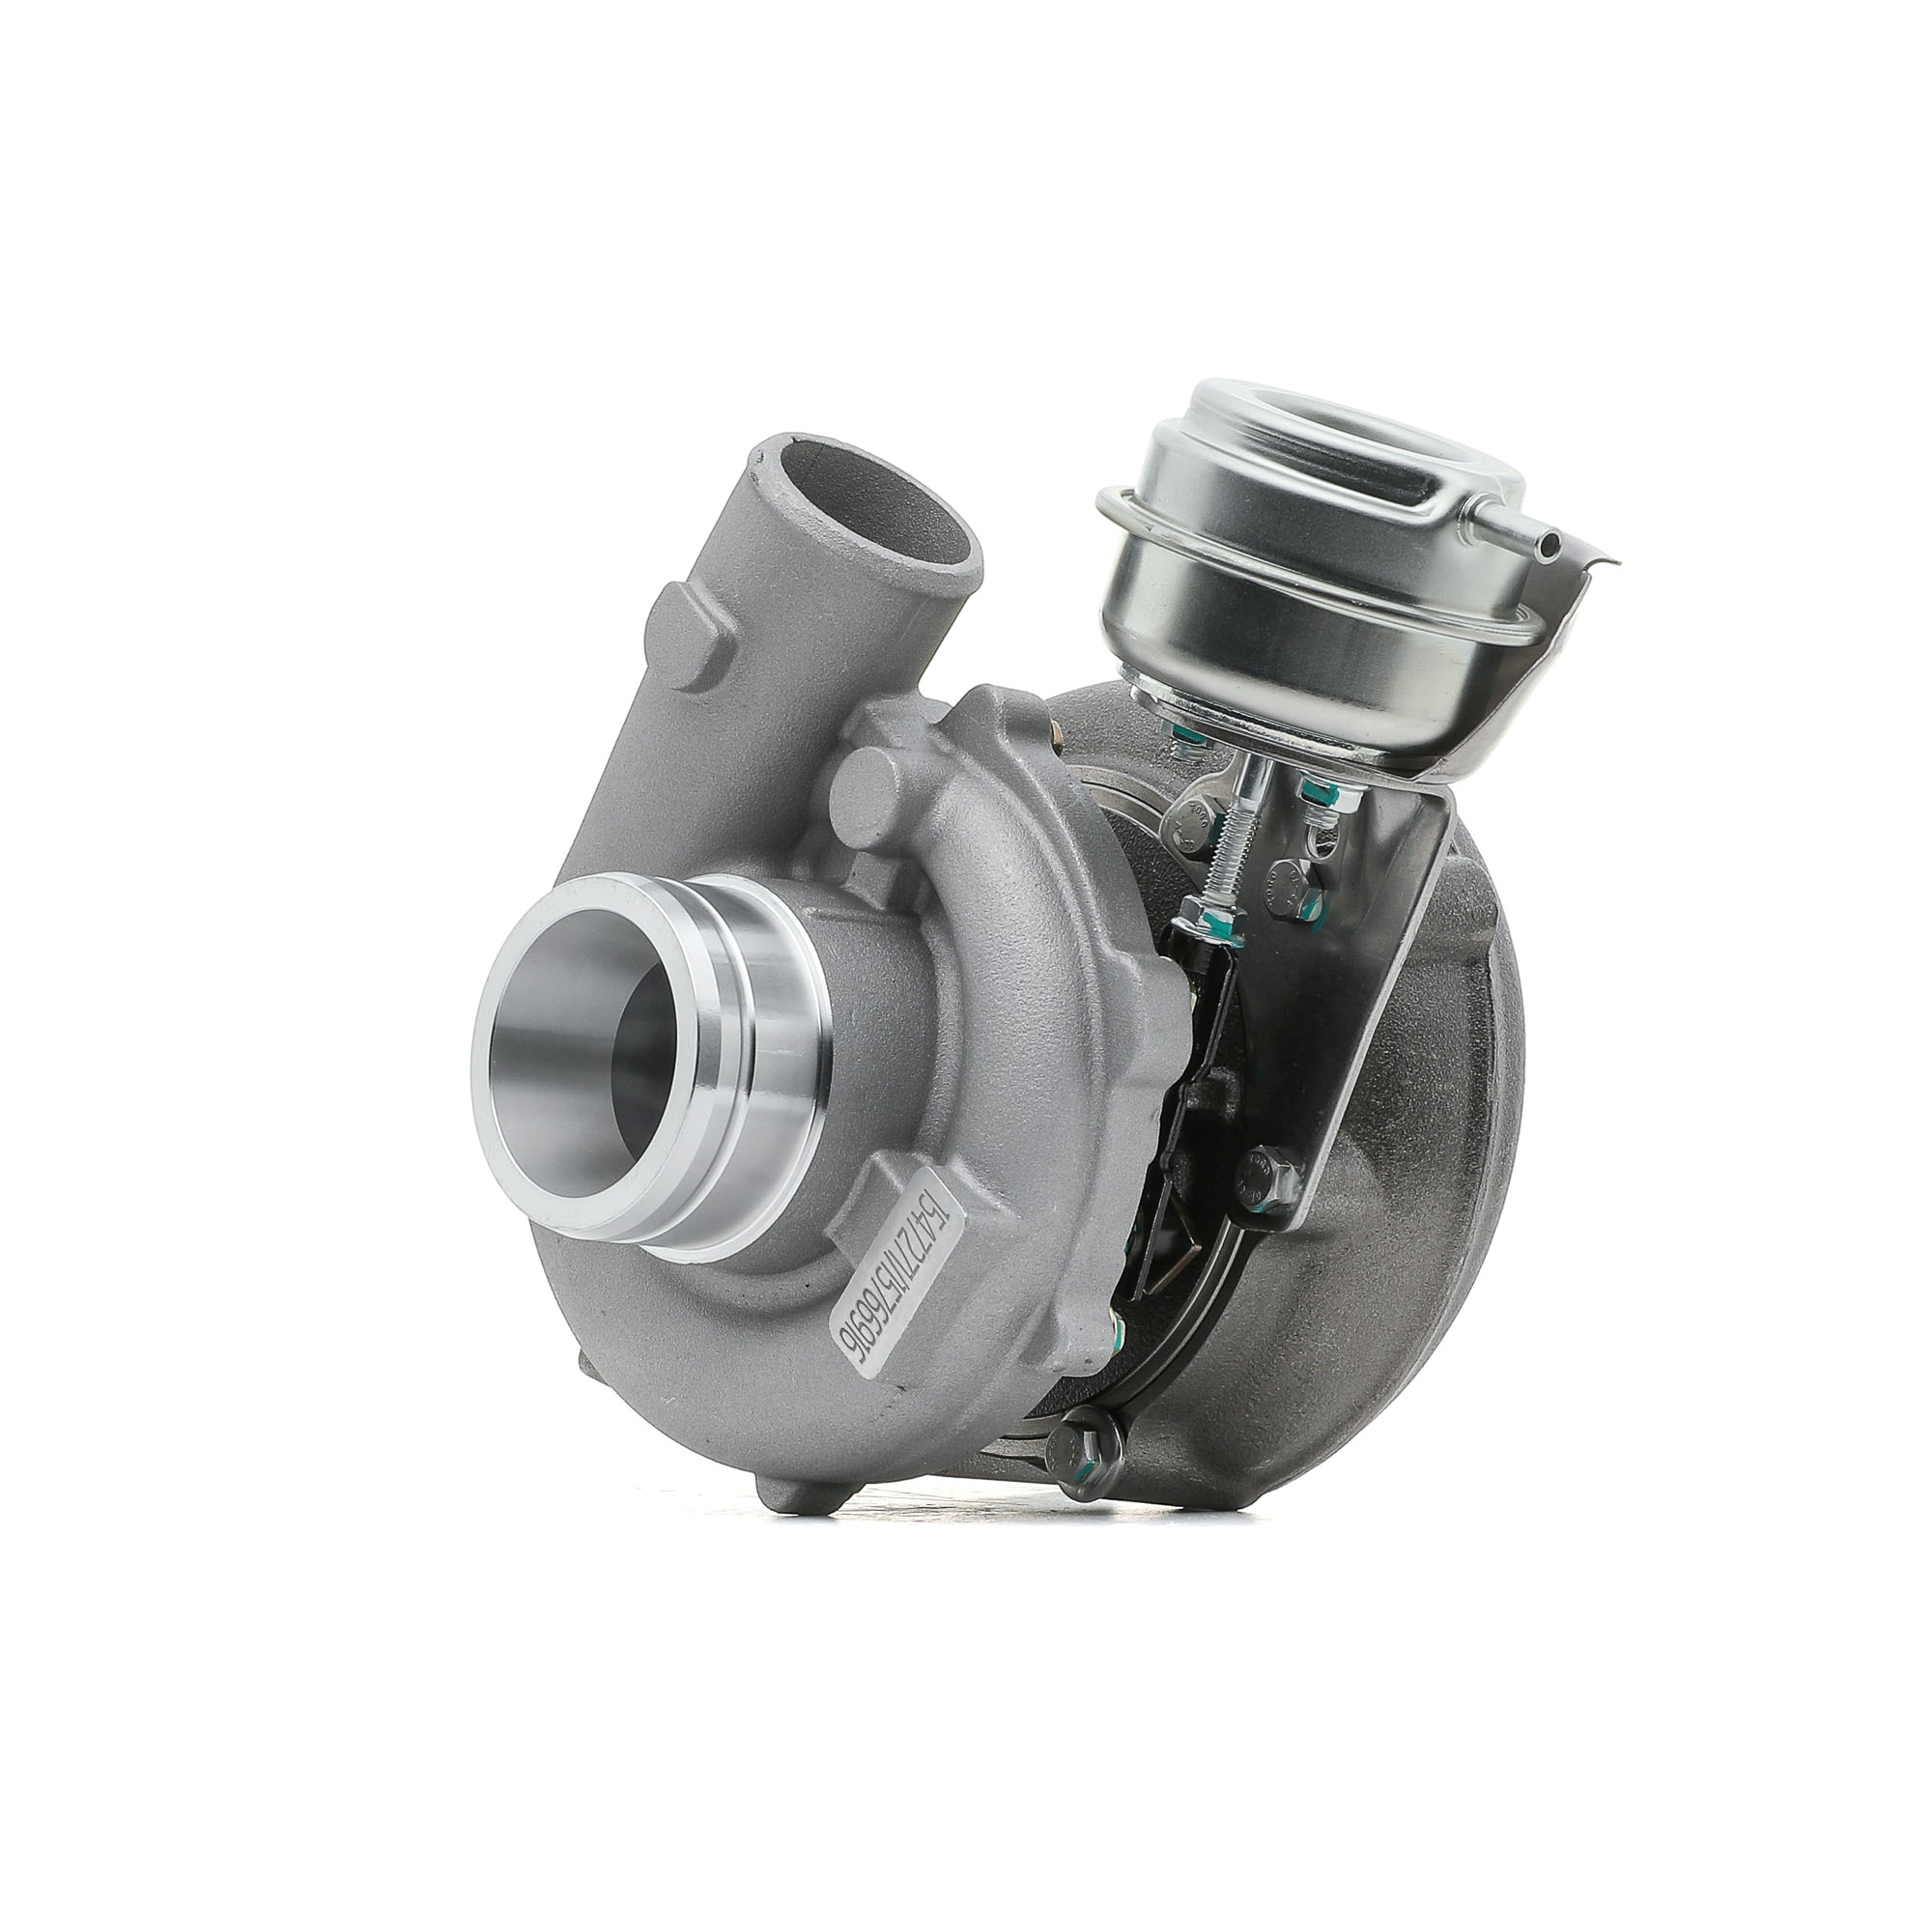 RIDEX 2234C0456 Turbocharger Exhaust Turbocharger, VTG turbocharger, Euro 3, Pneumatic, without attachment material